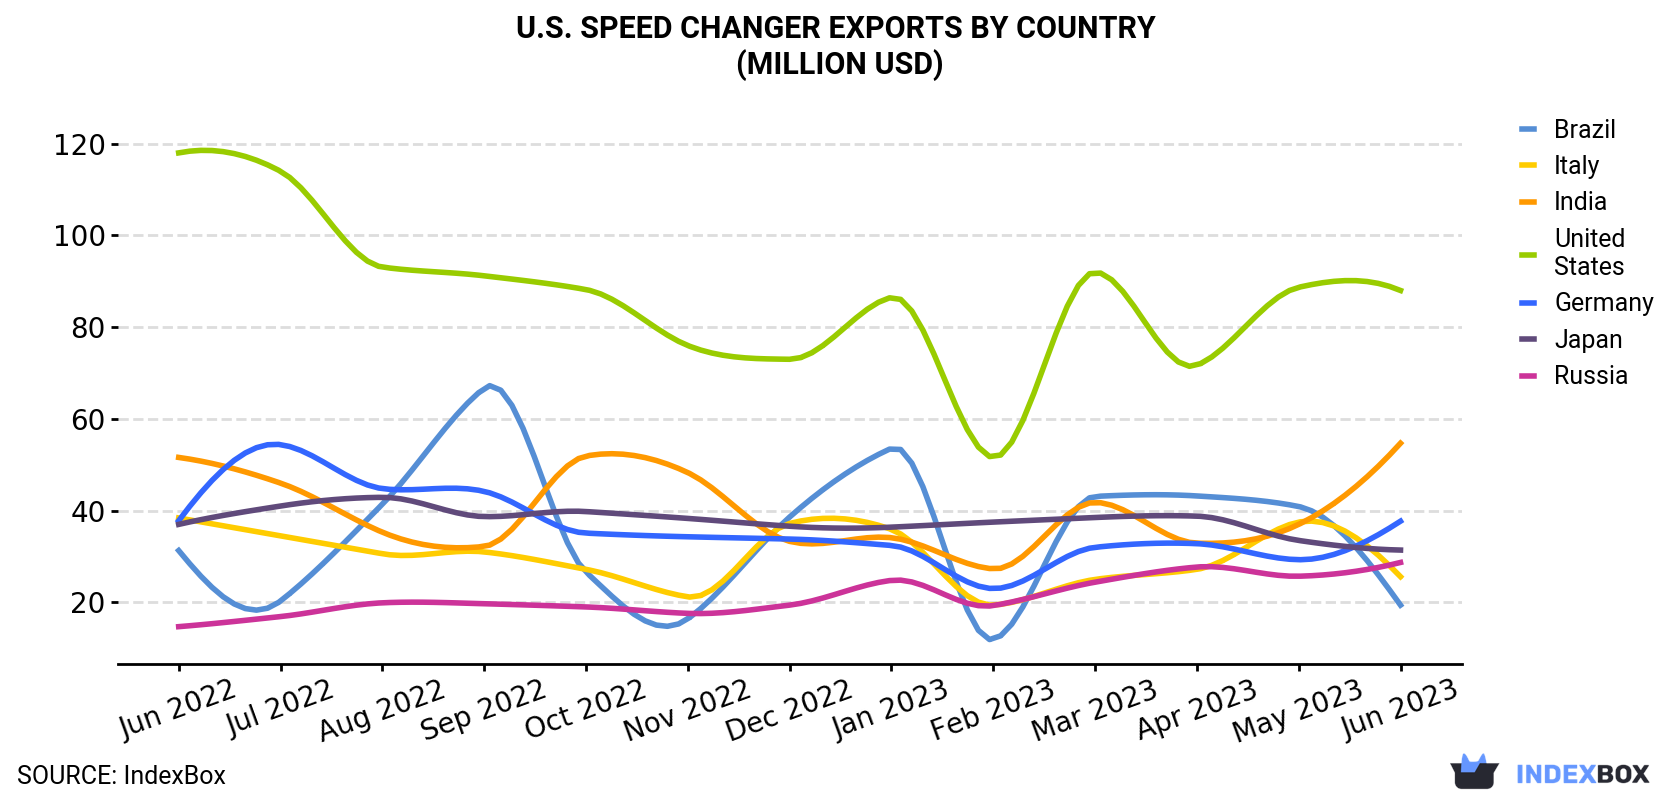 U.S. Speed Changer Exports By Country (Million USD)